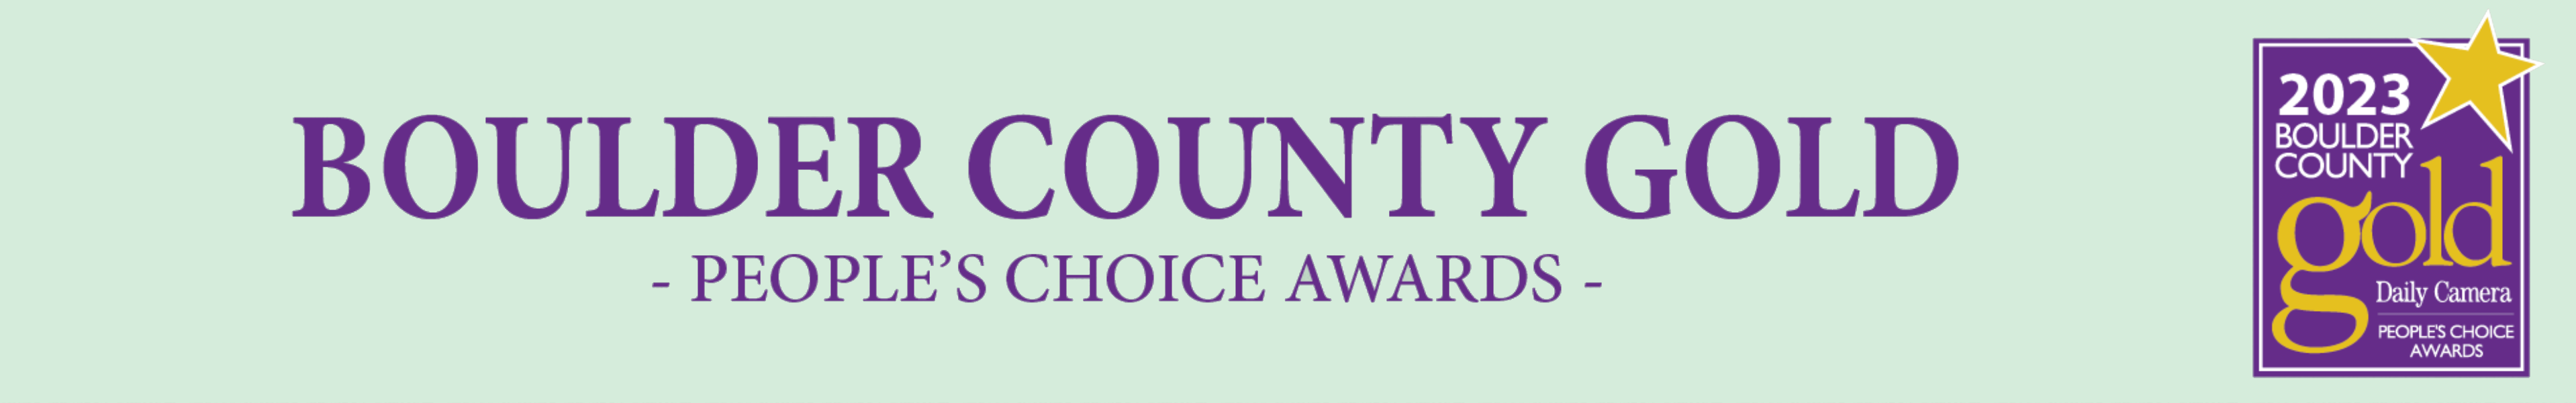 Boulder County Gold - People's Choice Awards